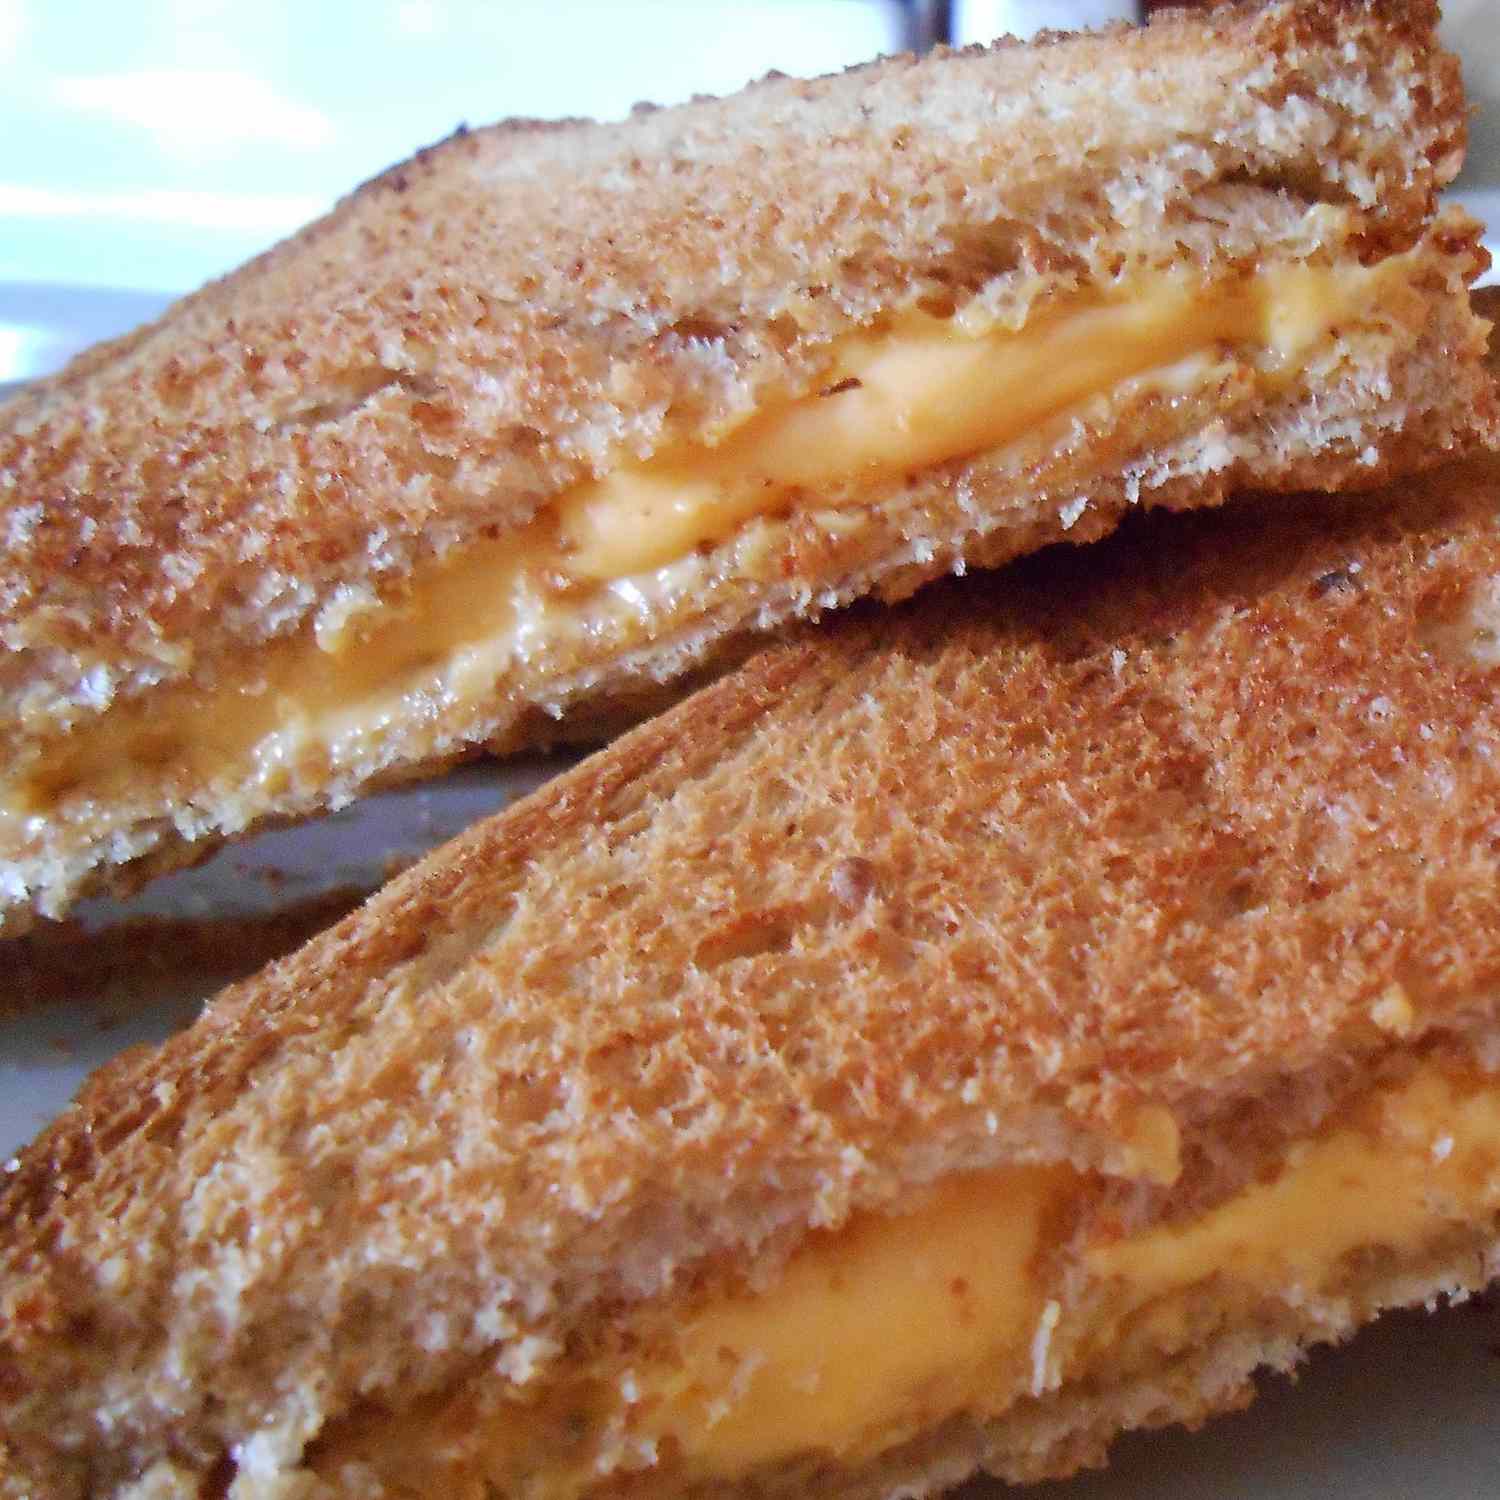 close up view of a Grilled Cheese Sandwich sliced in half, on a plate